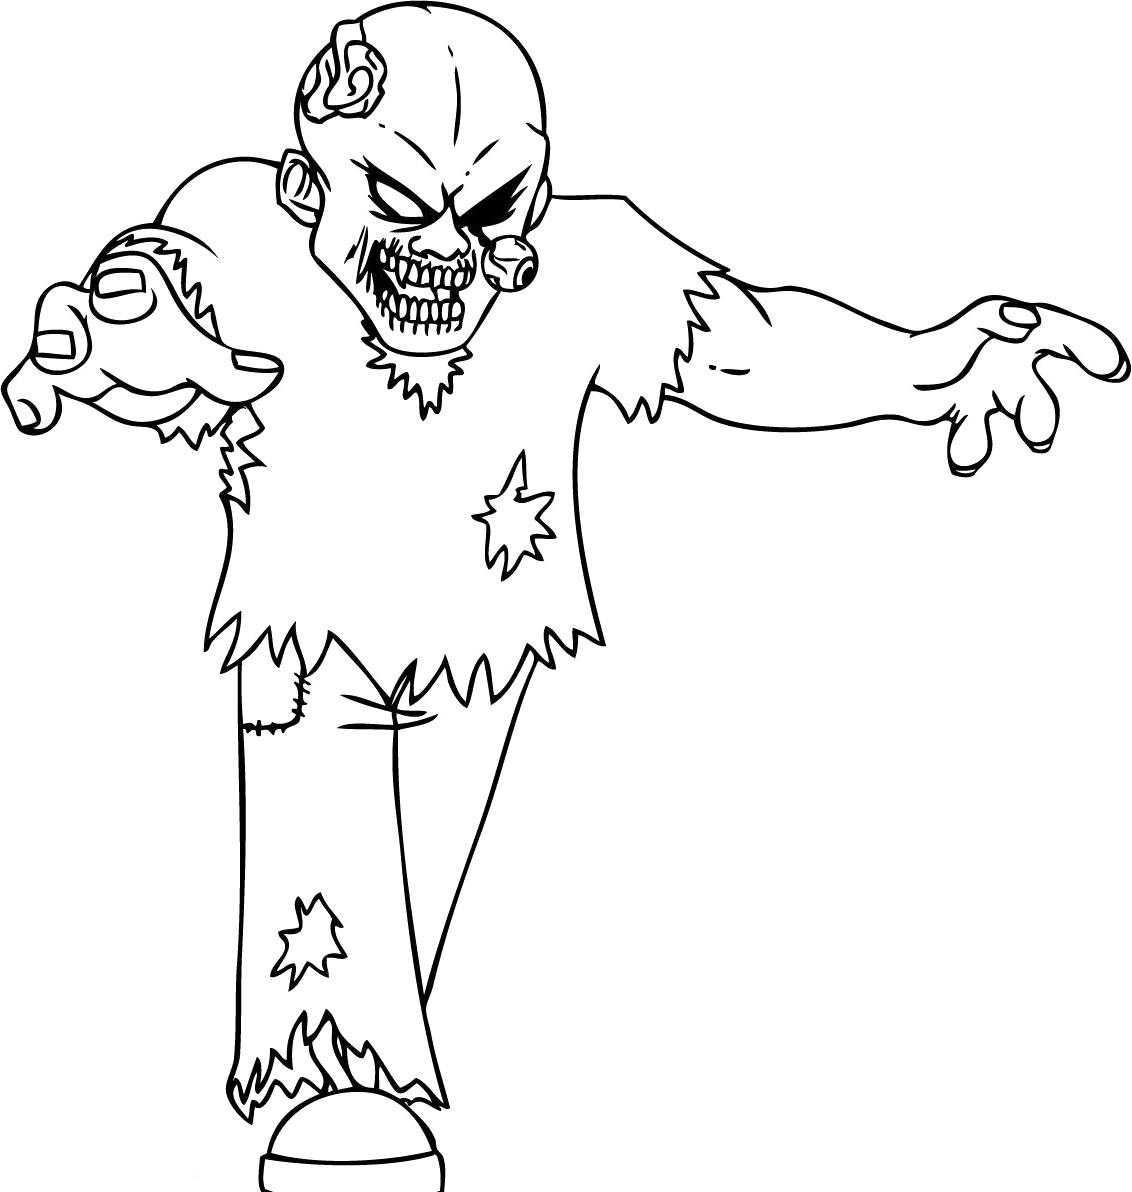 Easter coloring pages - Free 24+ Coloring Pages Zombies